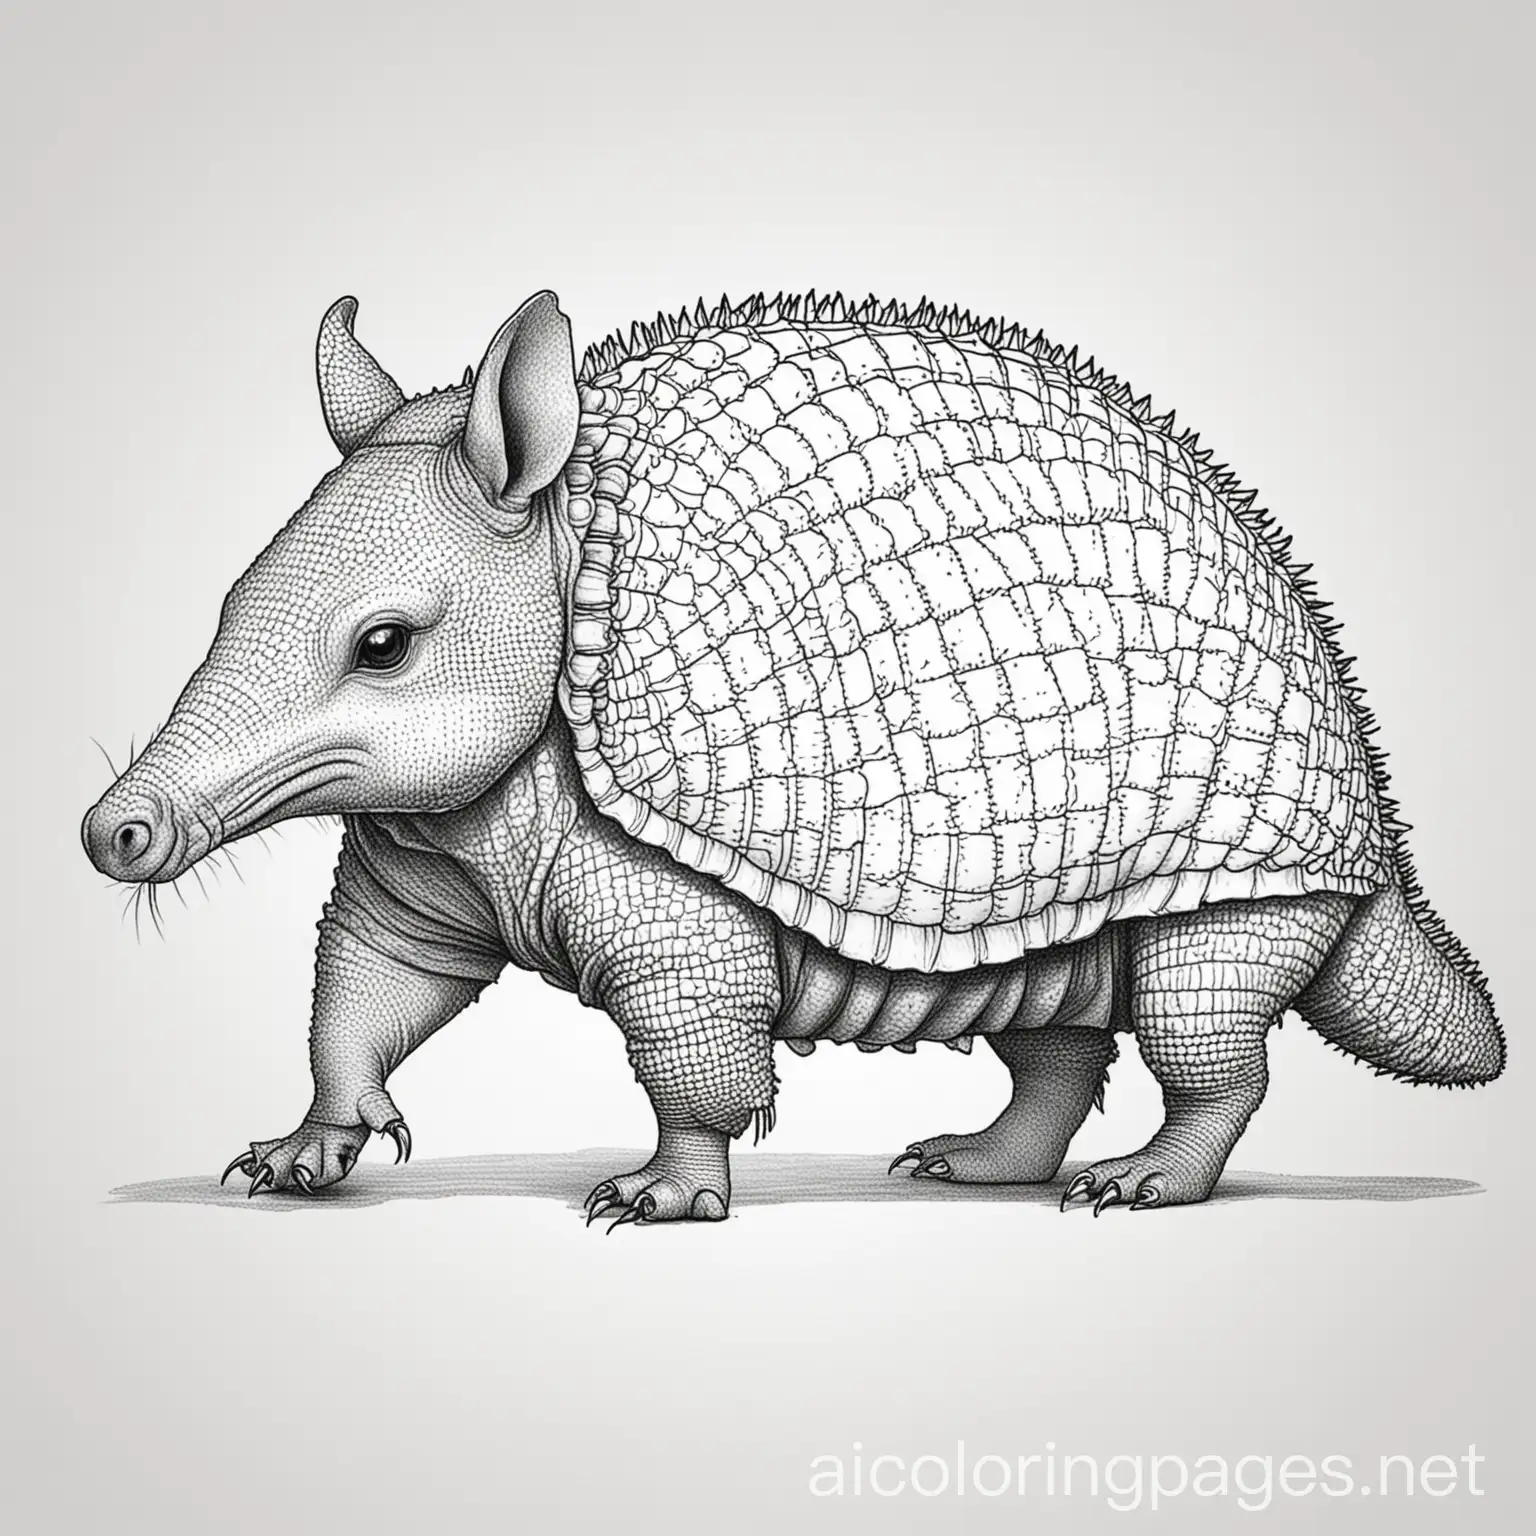 An armadillo, Coloring Page, black and white, line art, white background, Simplicity, Ample White Space. The background of the coloring page is plain white to make it easy for young children to color within the lines. The outlines of all the subjects are easy to distinguish, making it simple for kids to color without too much difficulty